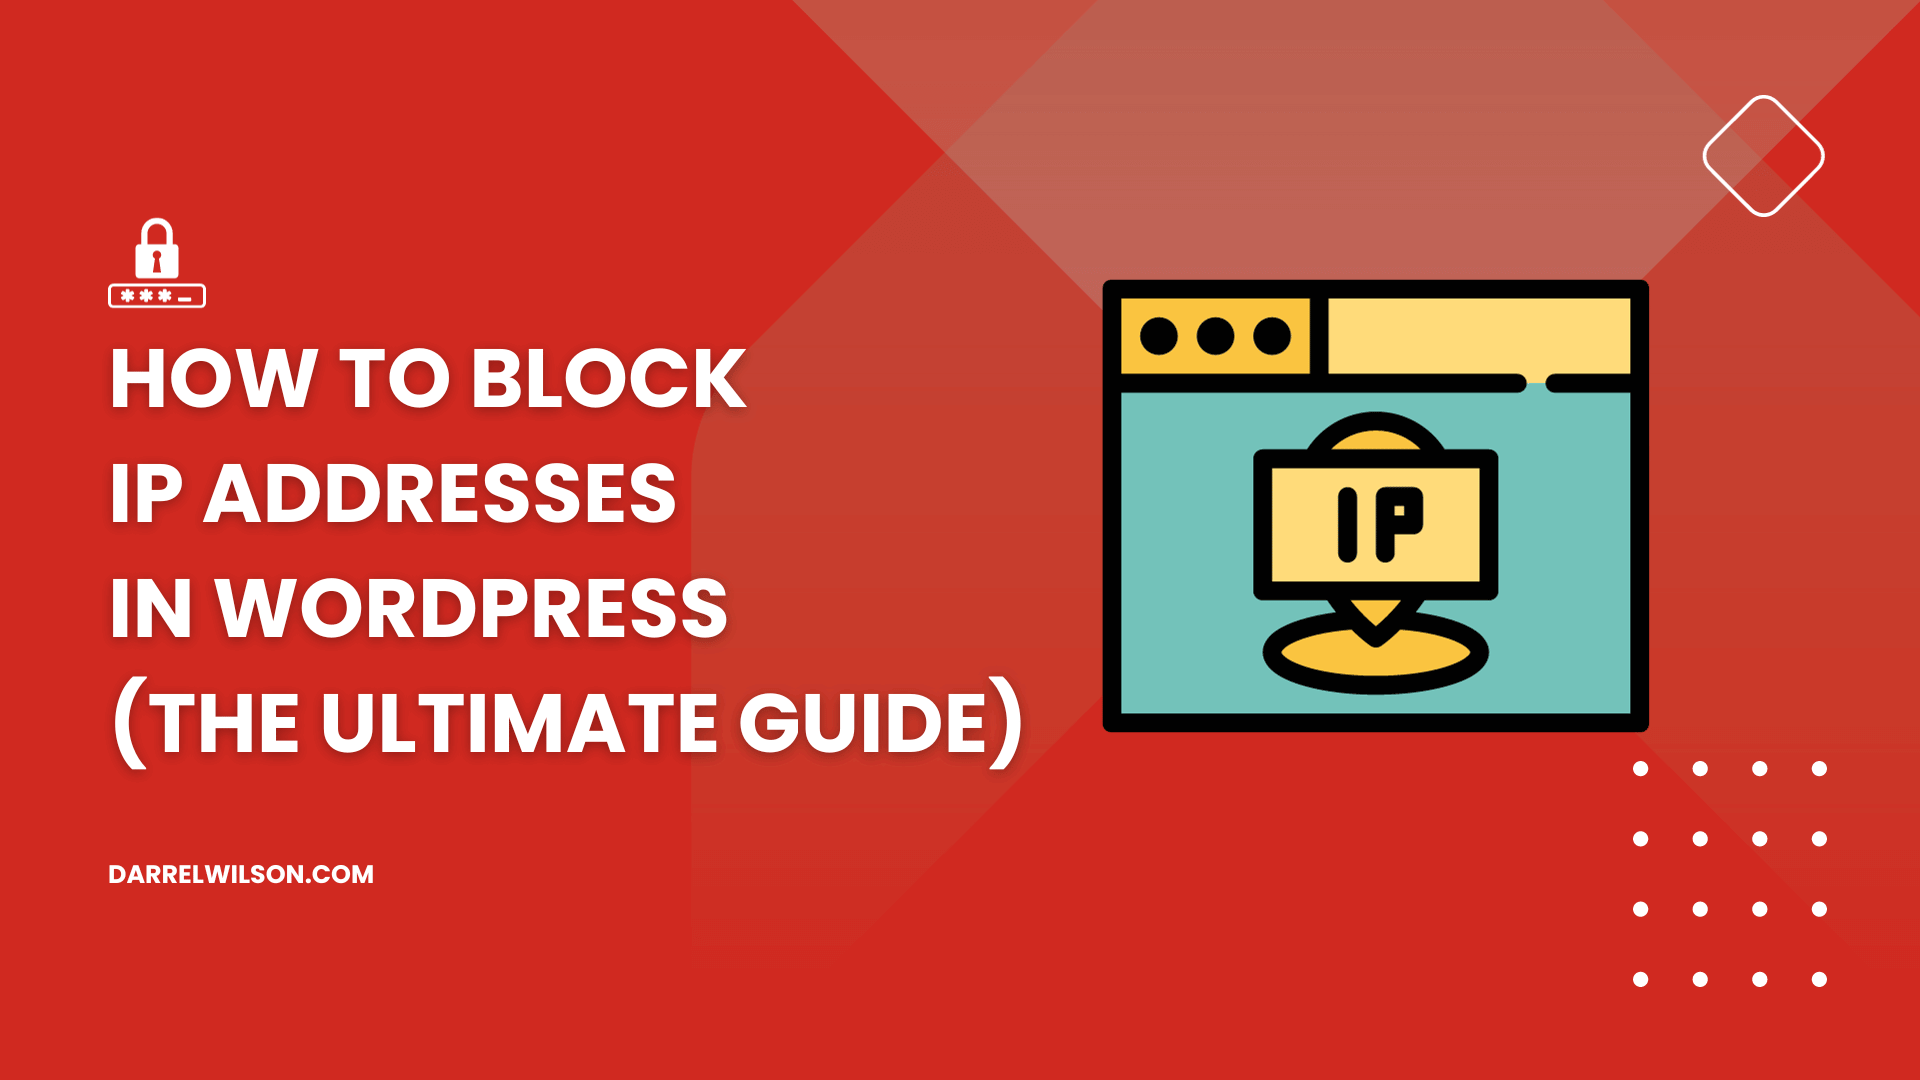 How to Block IP Addresses in WordPress (The Ultimate Guide)